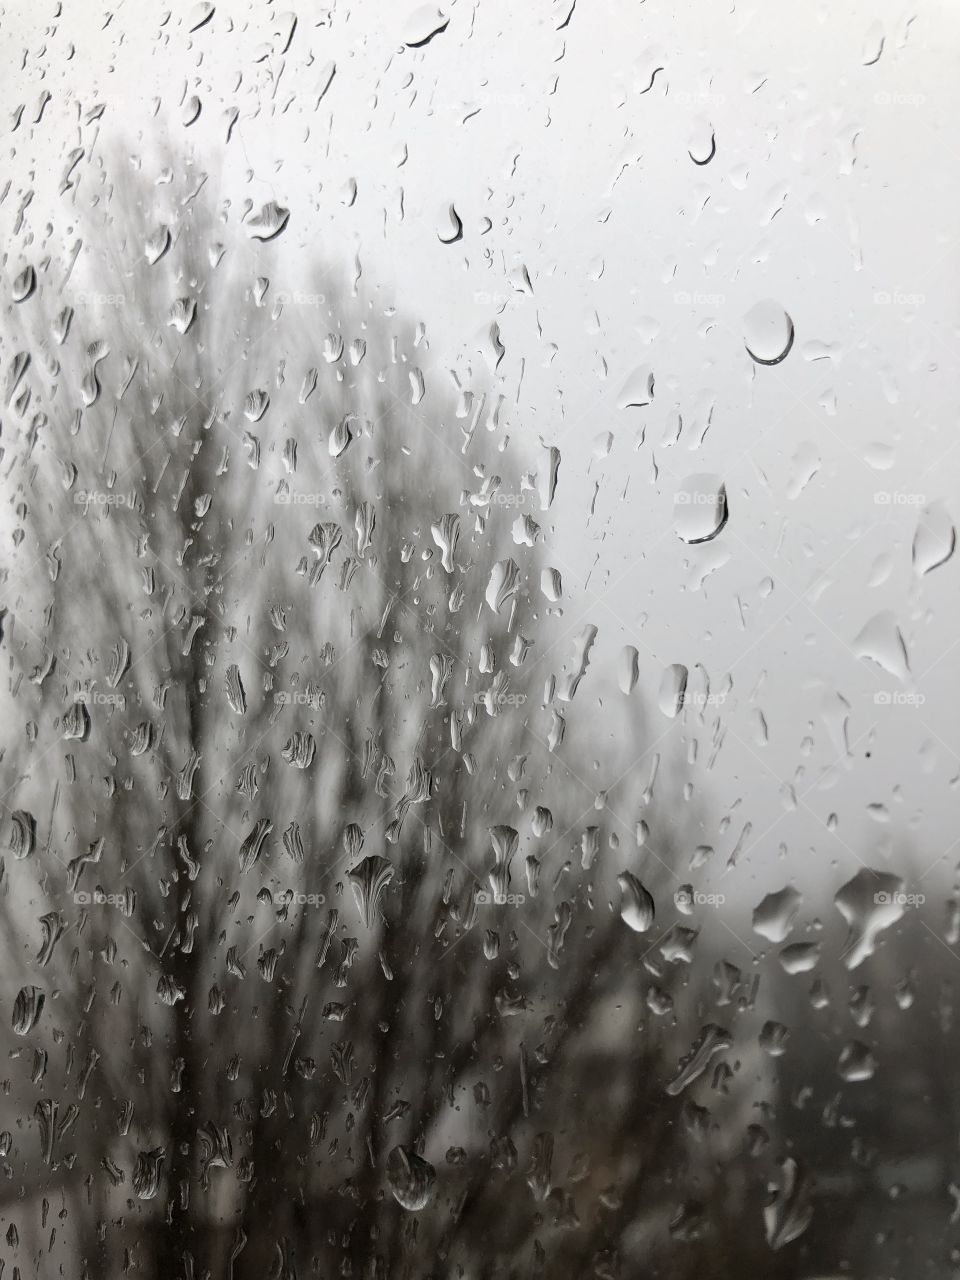 Drops of the rain on the window glass 